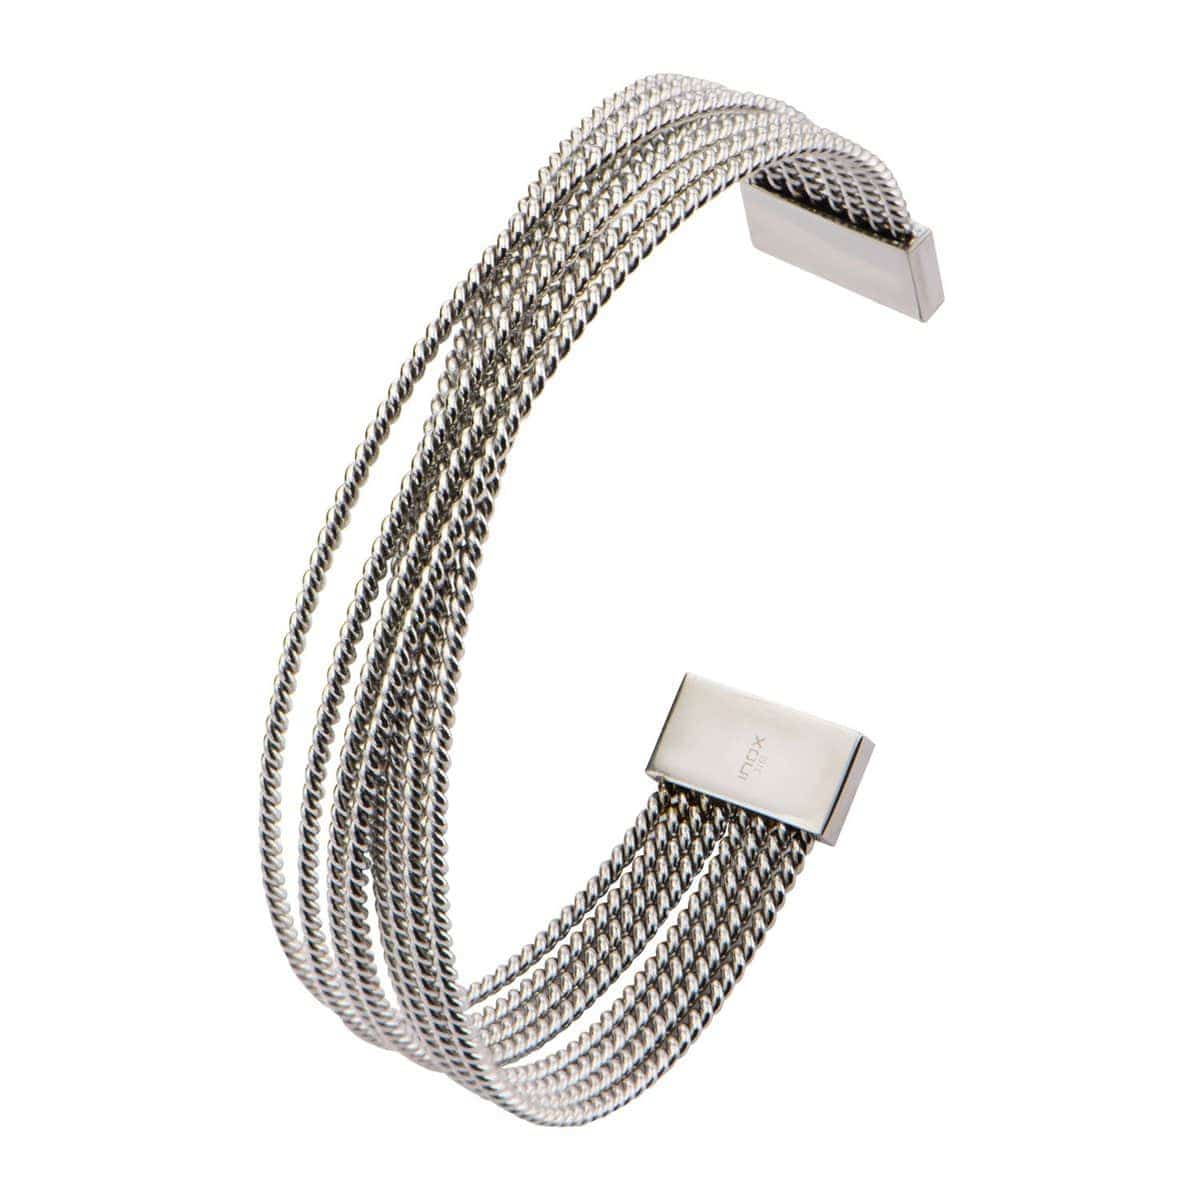 INOX JEWELRY Bracelets Silver Tone Stainless Steel Overlapping Cable Cuff Kadaa BR4115